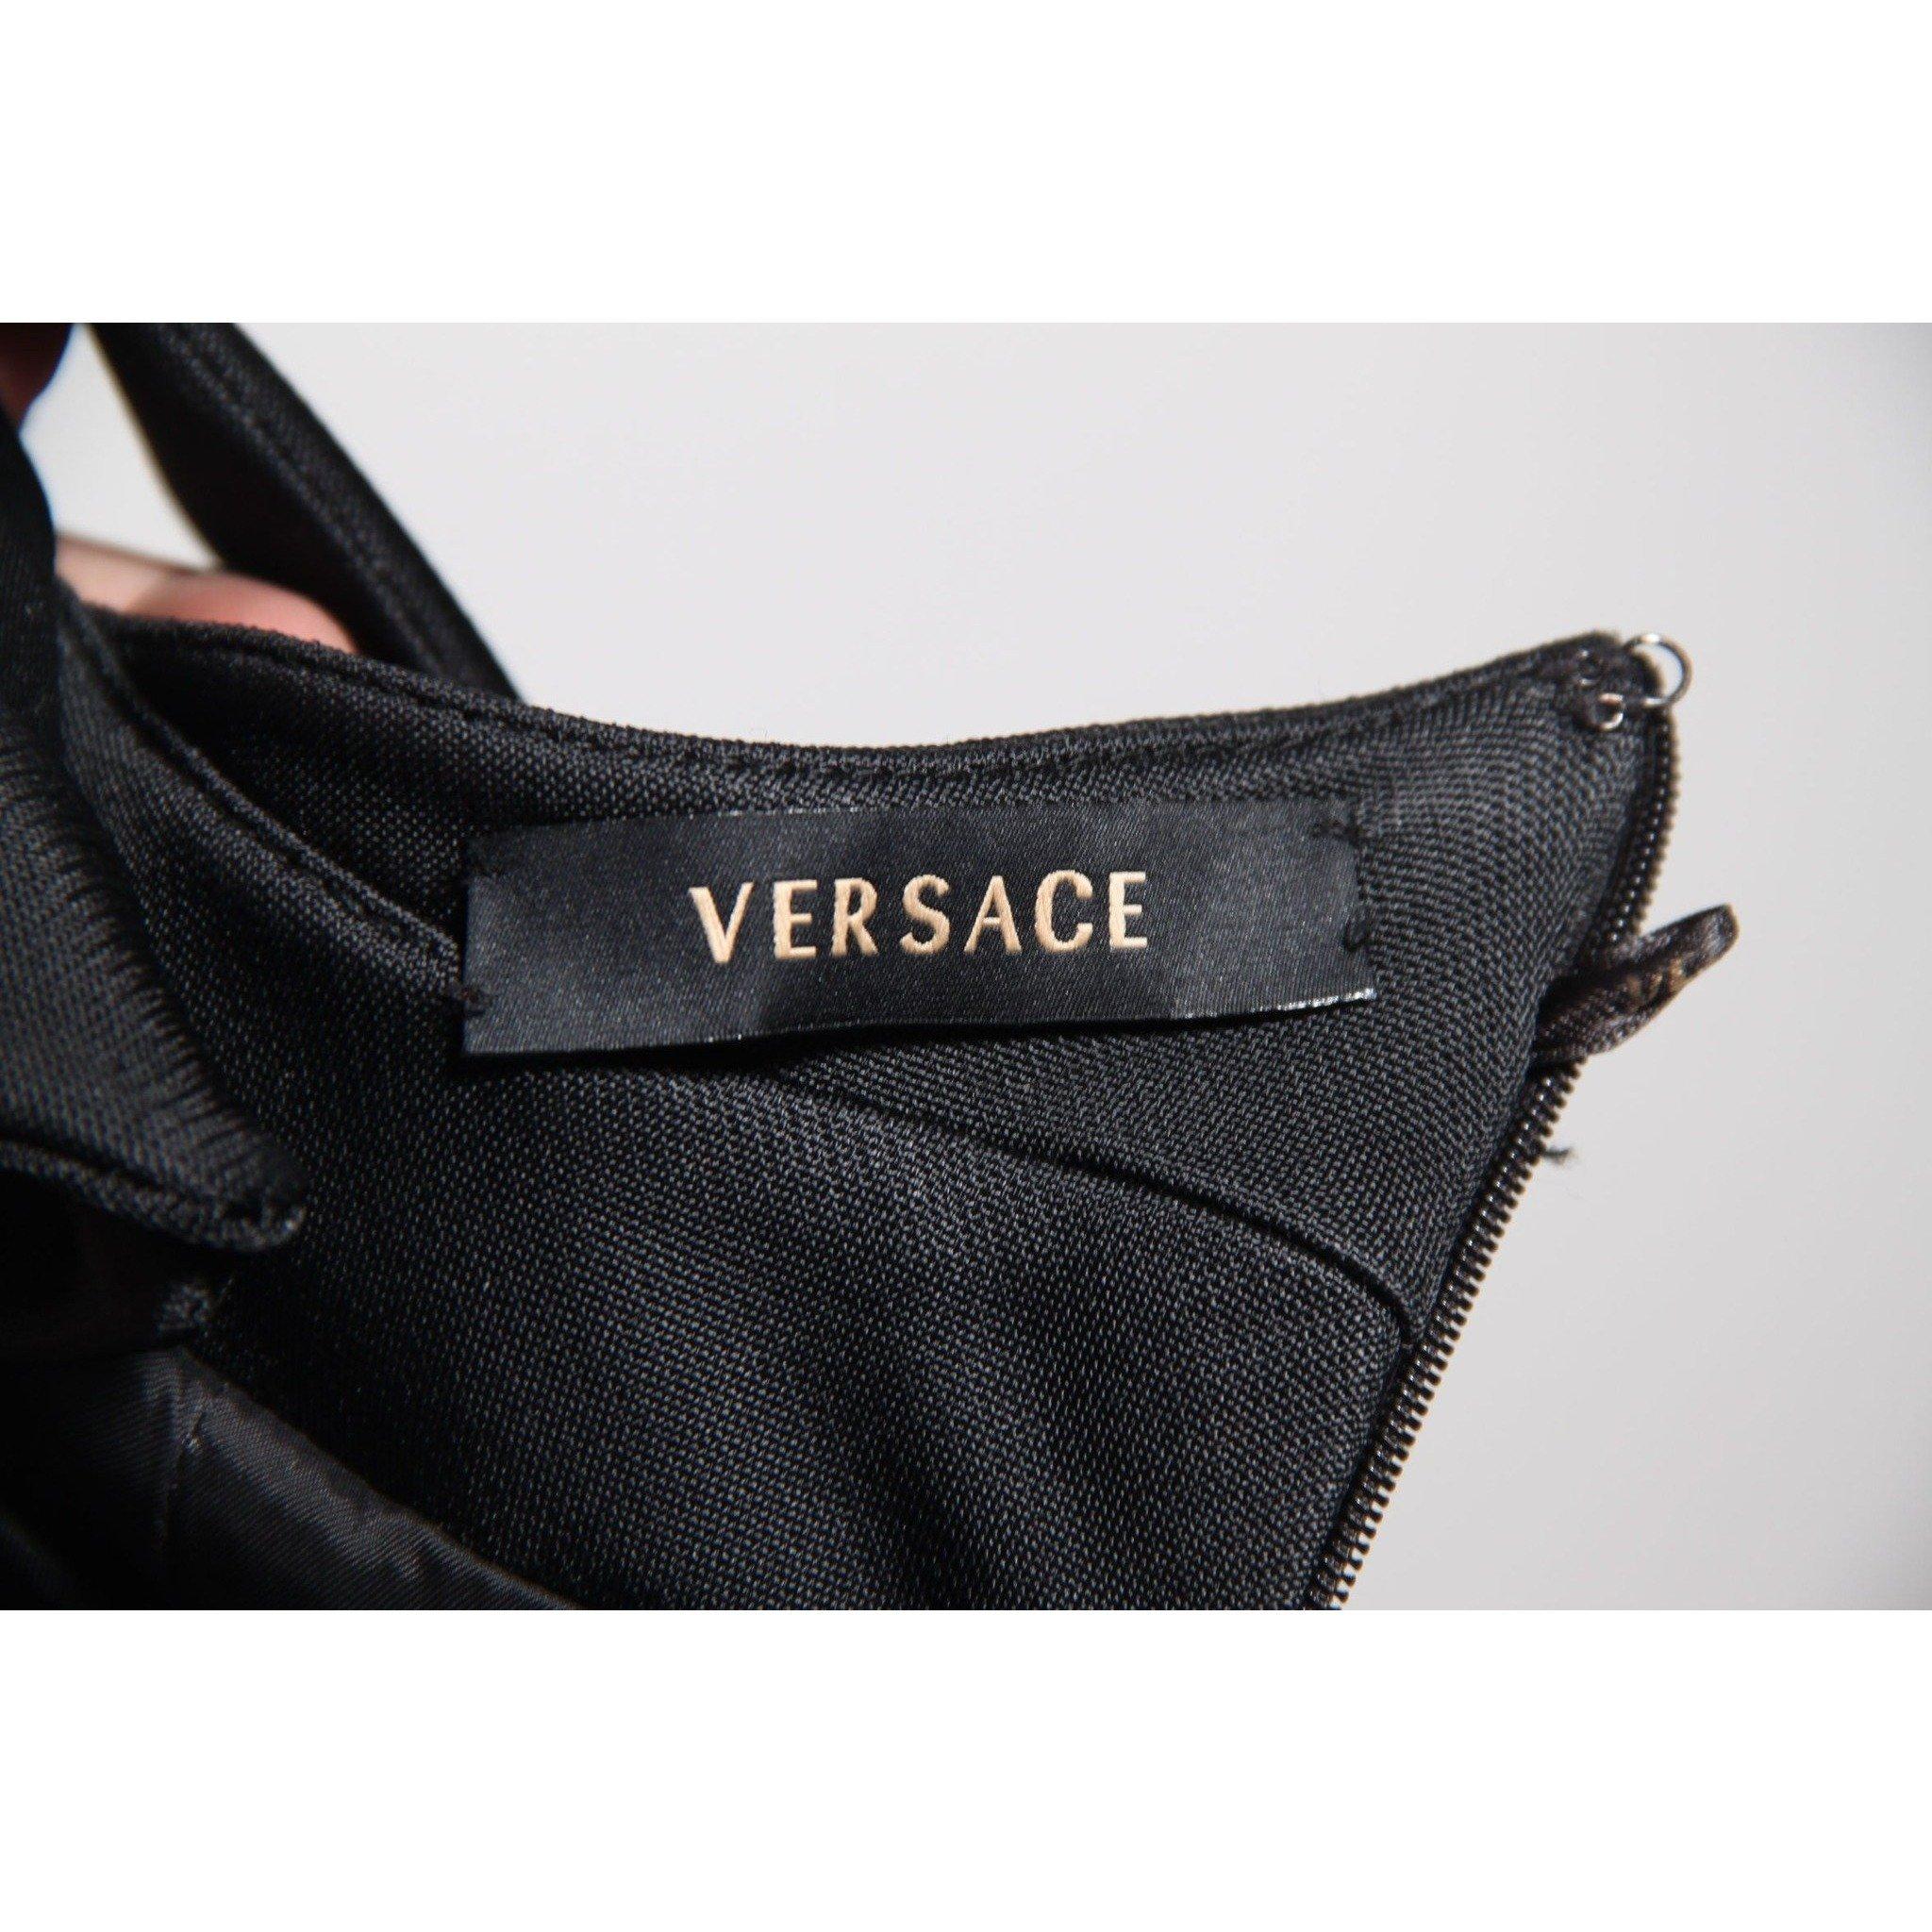 Versace Sleeveless Little Black Dress with Sheer Insert Size 40

Model: Little Black Dress
Material: Acetate
Color: Black
Gender: Women
Country of Manufacture: Italy
Size: Small
TOTAL LENGTH (from shoulder to hem): 34 1/2 inches - 87,6 m
SLEEVE